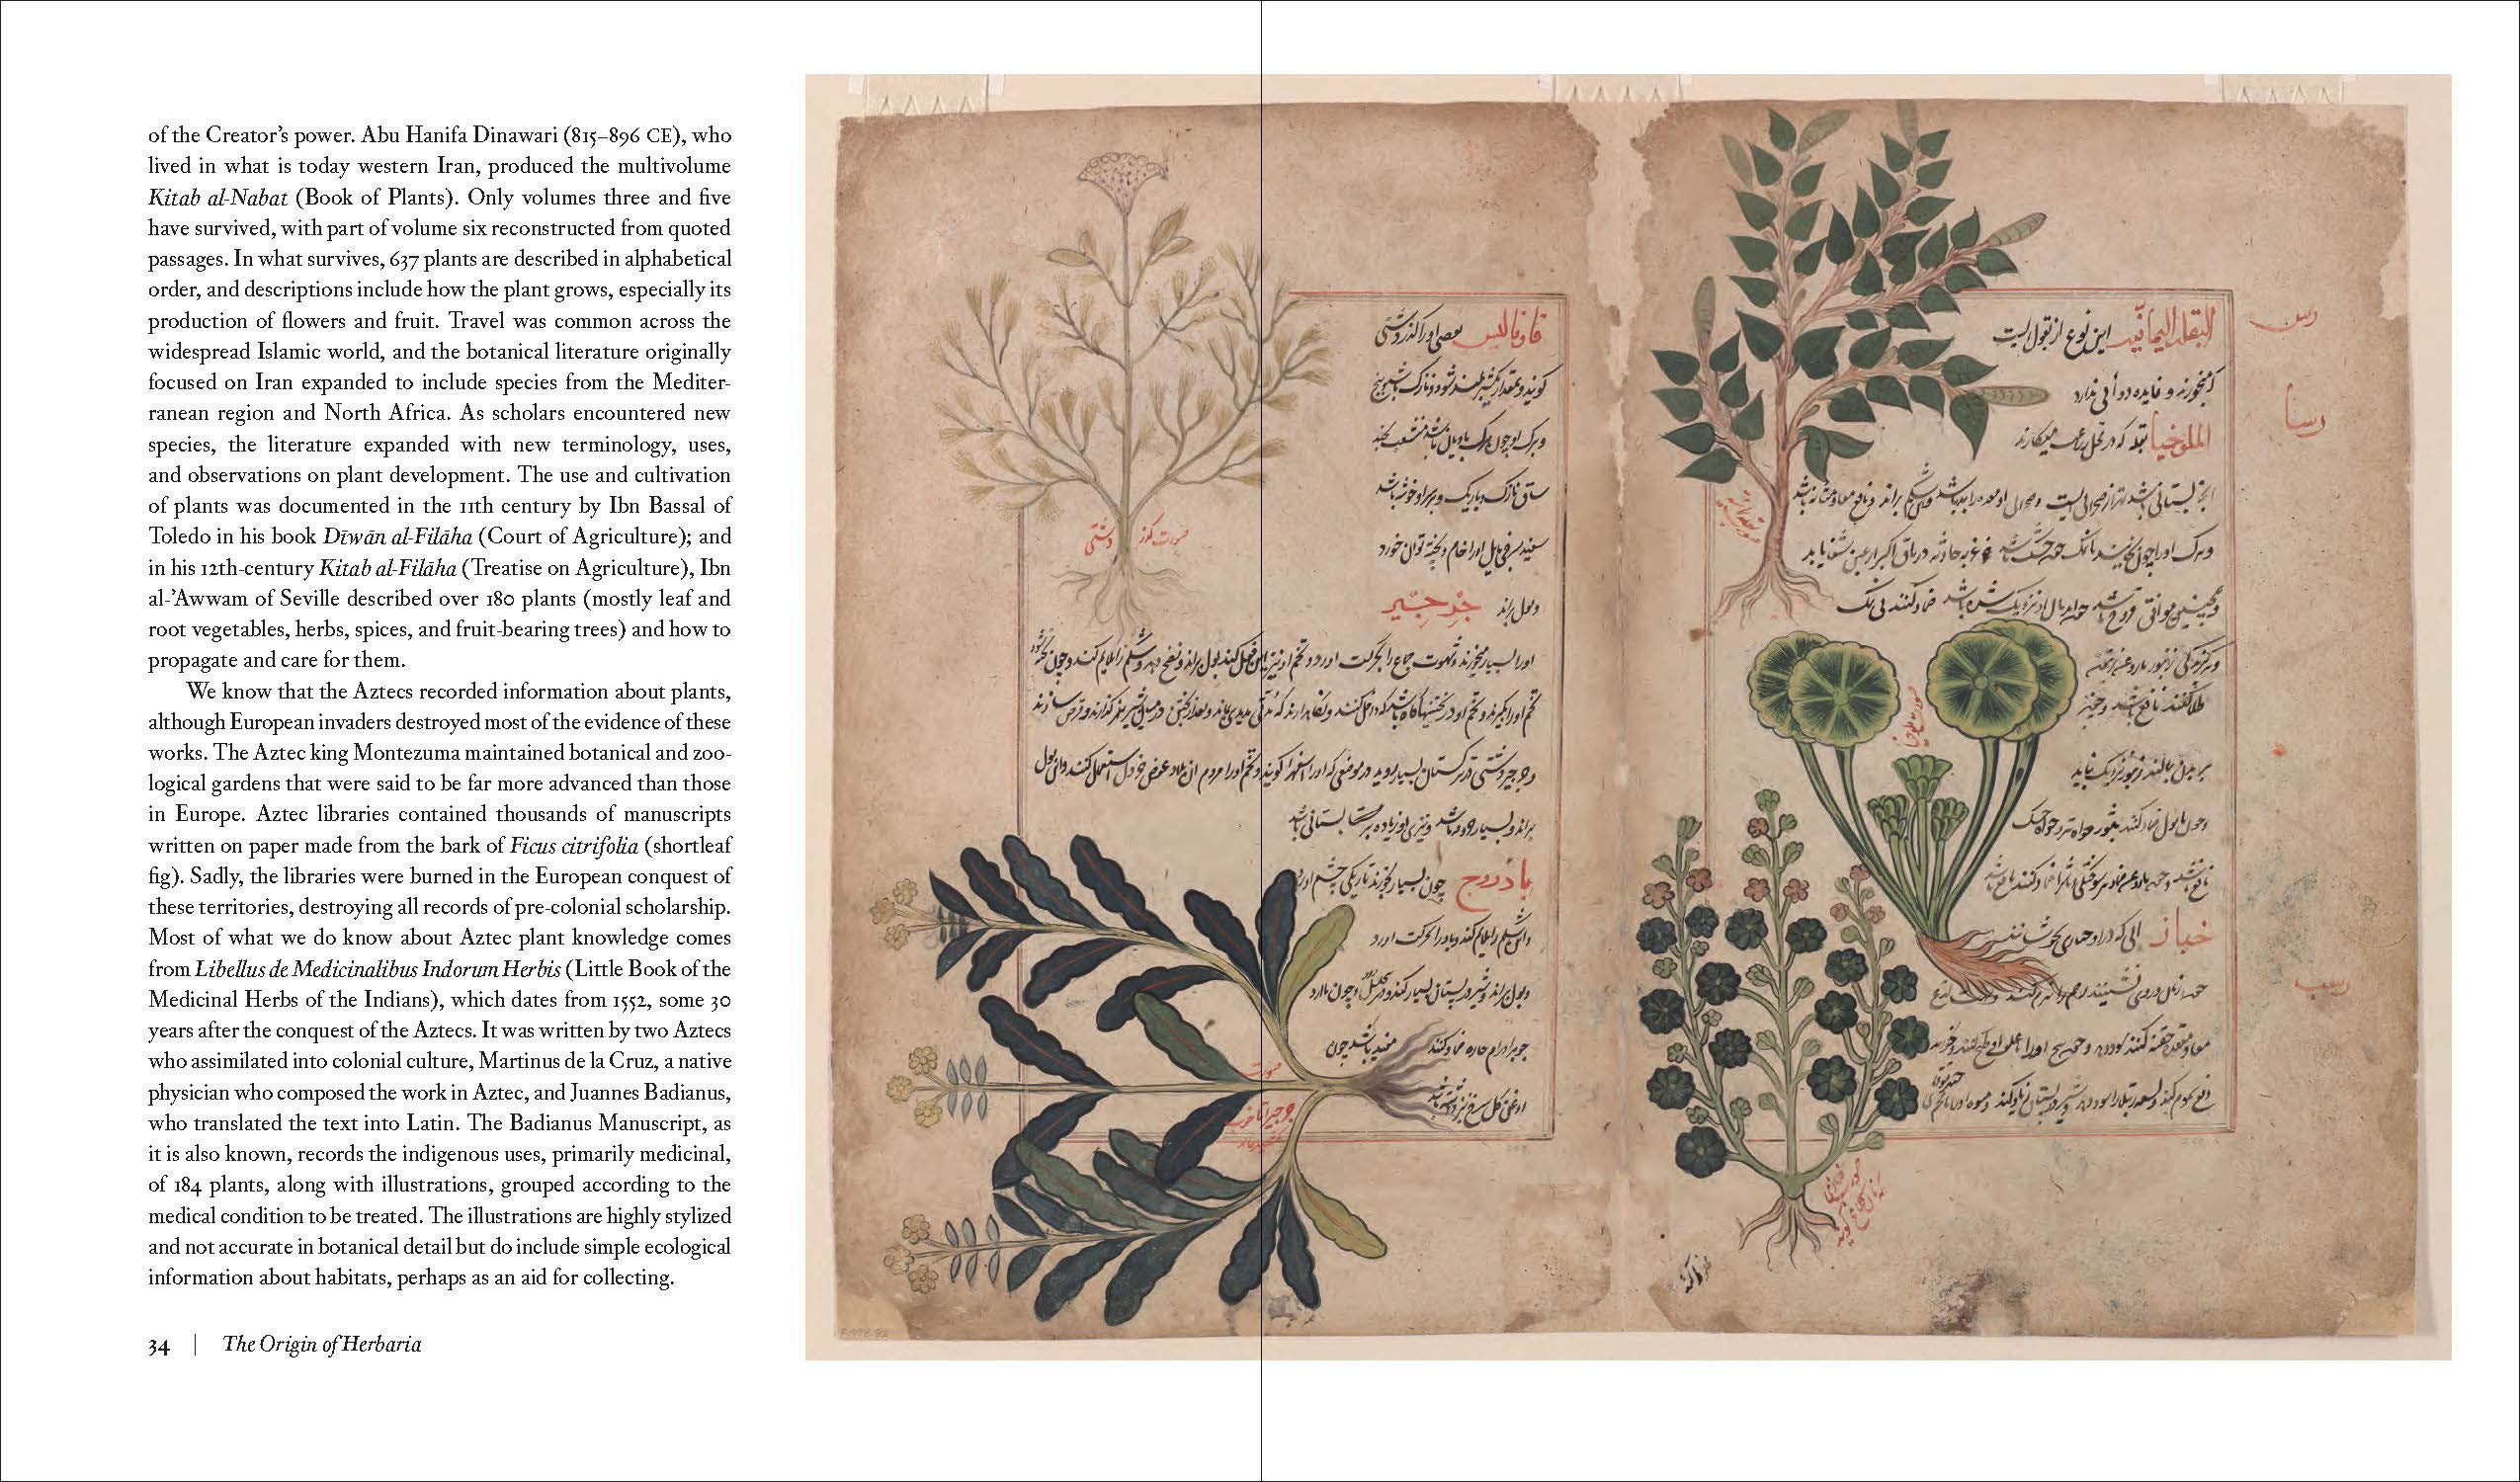 Herbarium - The Quest to Preserve & Classify the World's Plants